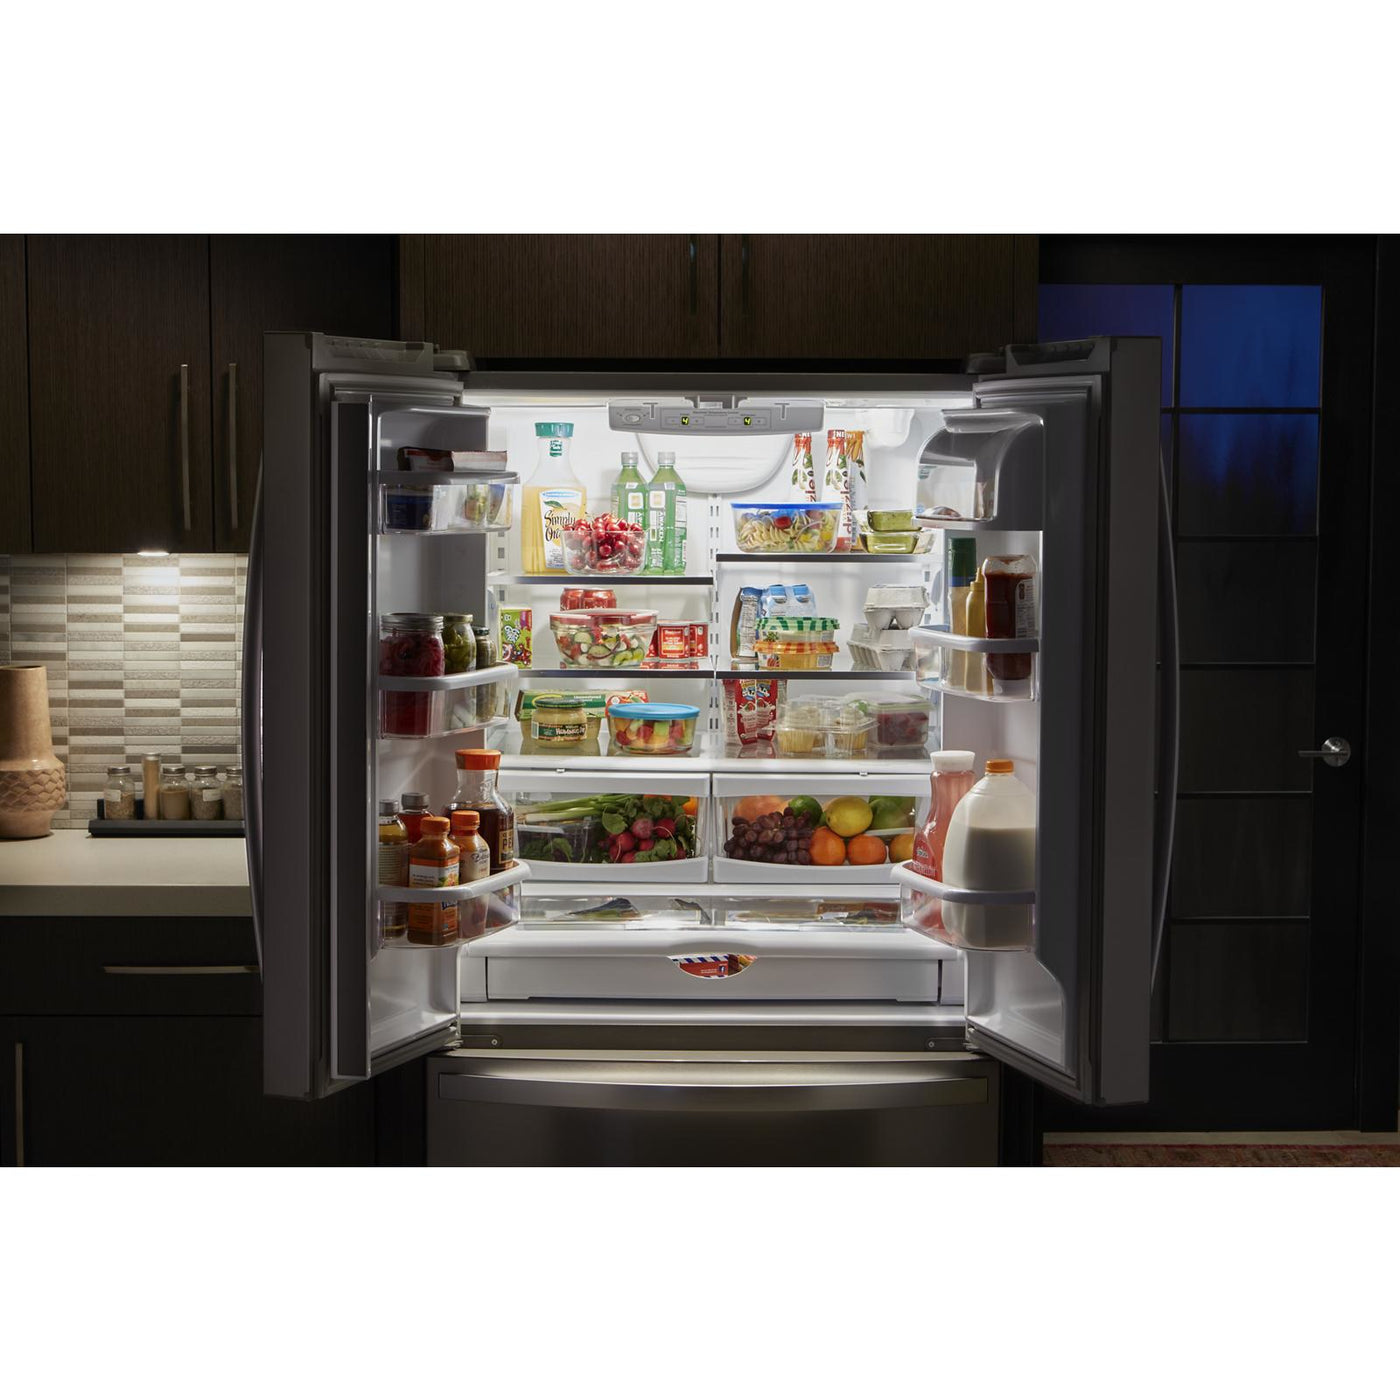 Whirlpool White Counter-Depth French Door Refrigerator (20 Cu. Ft.) - WRF540CWHW